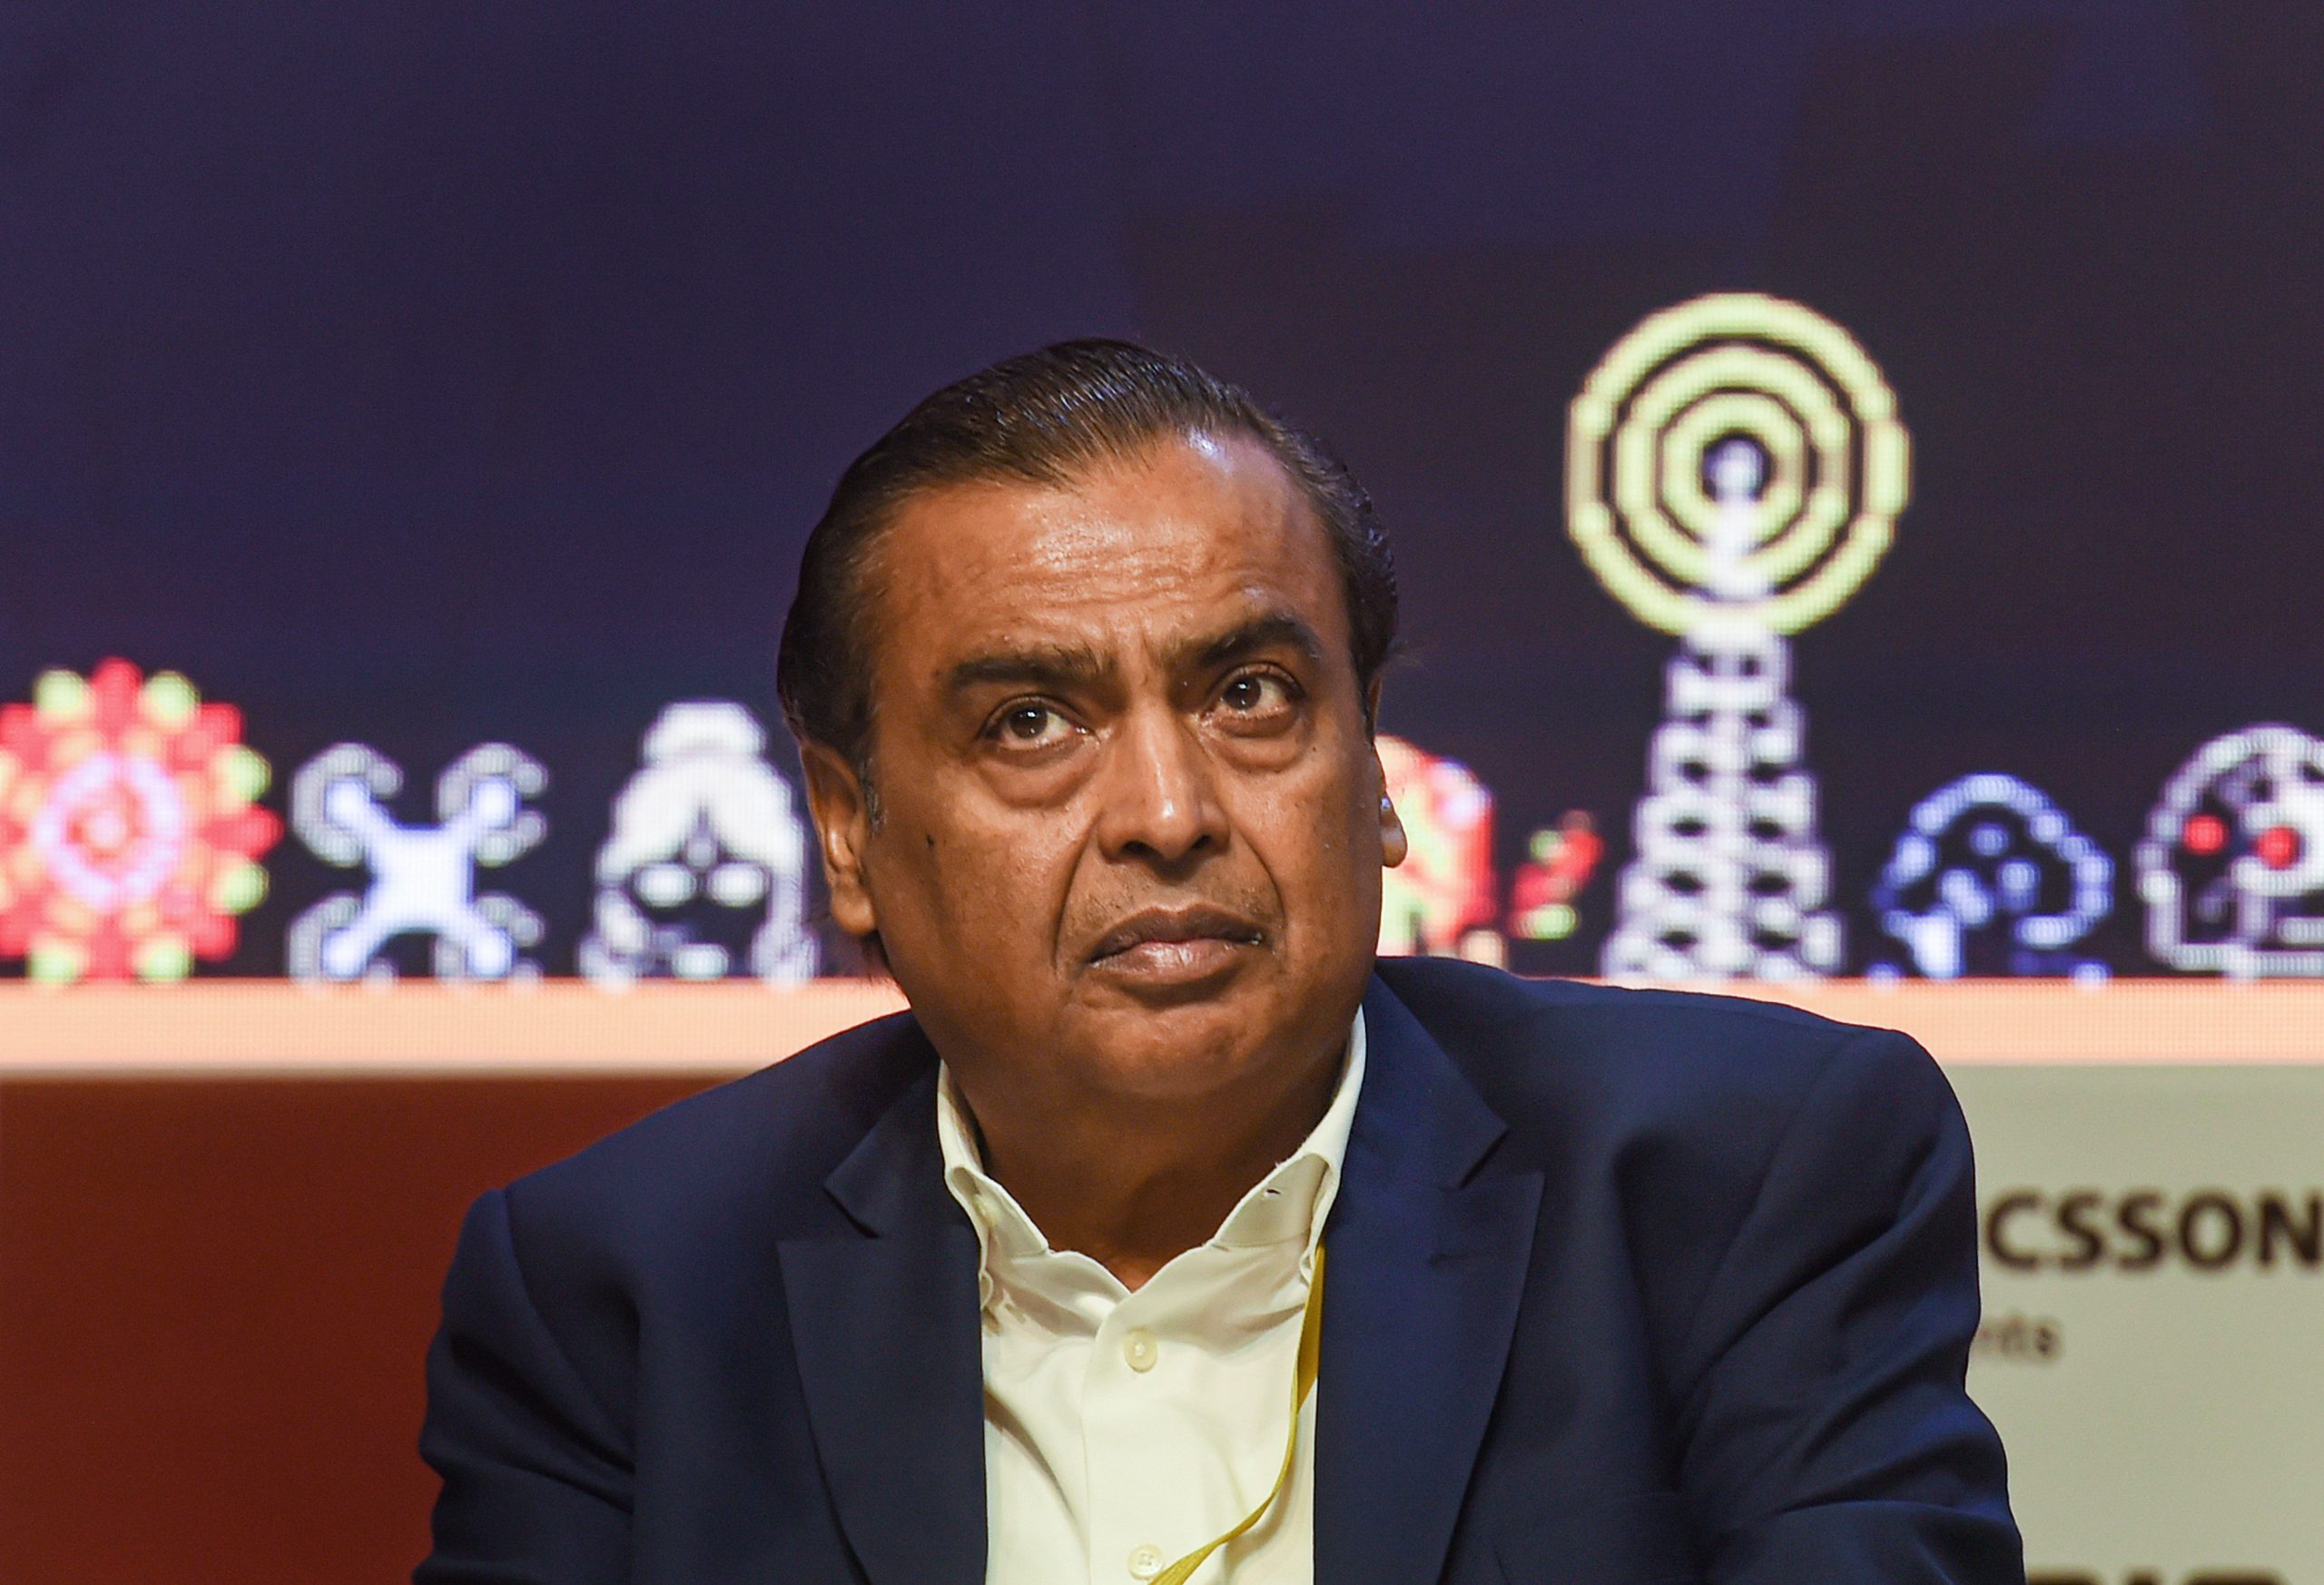 Reliance to demerge, list financial services unit as Jio Financial Services